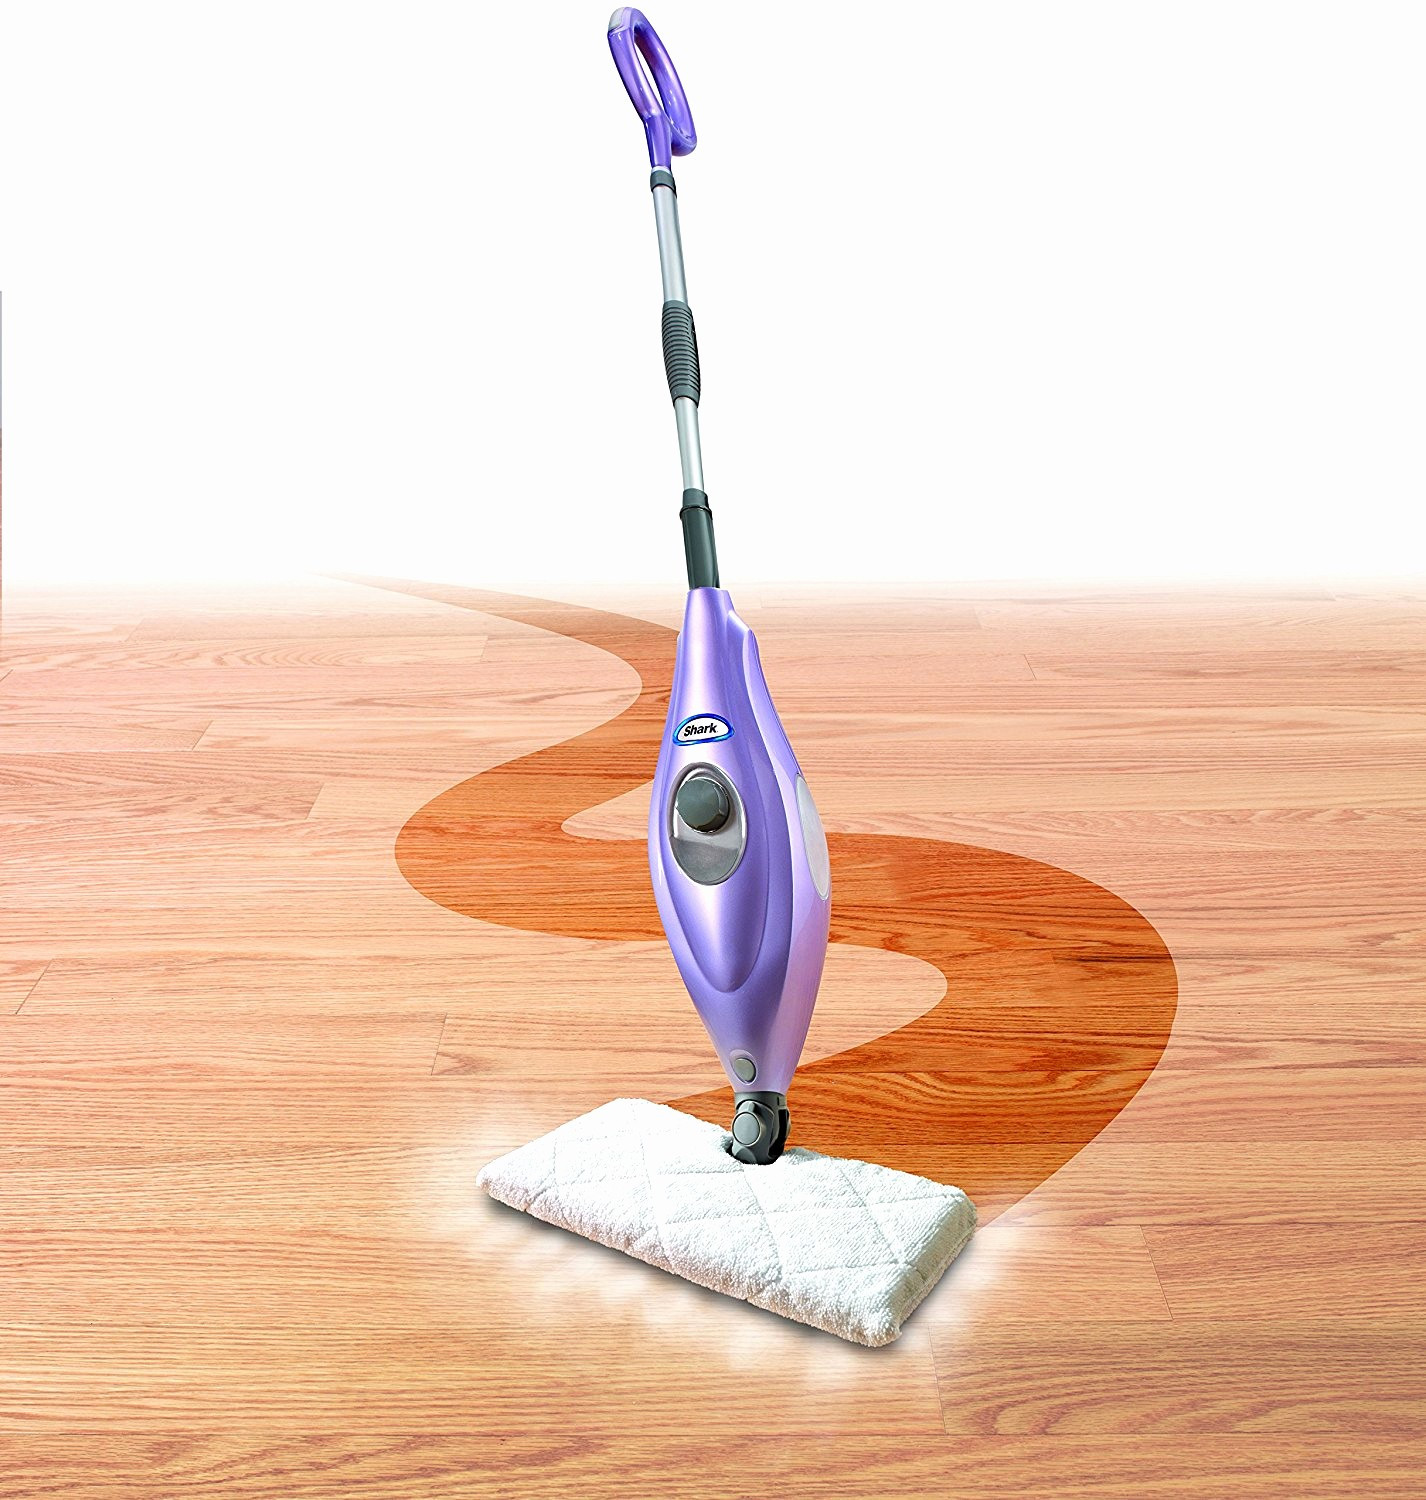 13 Great Bona X Hardwood Floor Cleaner Home Depot 2024 free download bona x hardwood floor cleaner home depot of 16 inspirational how to polish hardwood floors photos dizpos com intended for how to polish hardwood floors unique 50 luxury bona hardwood floor g